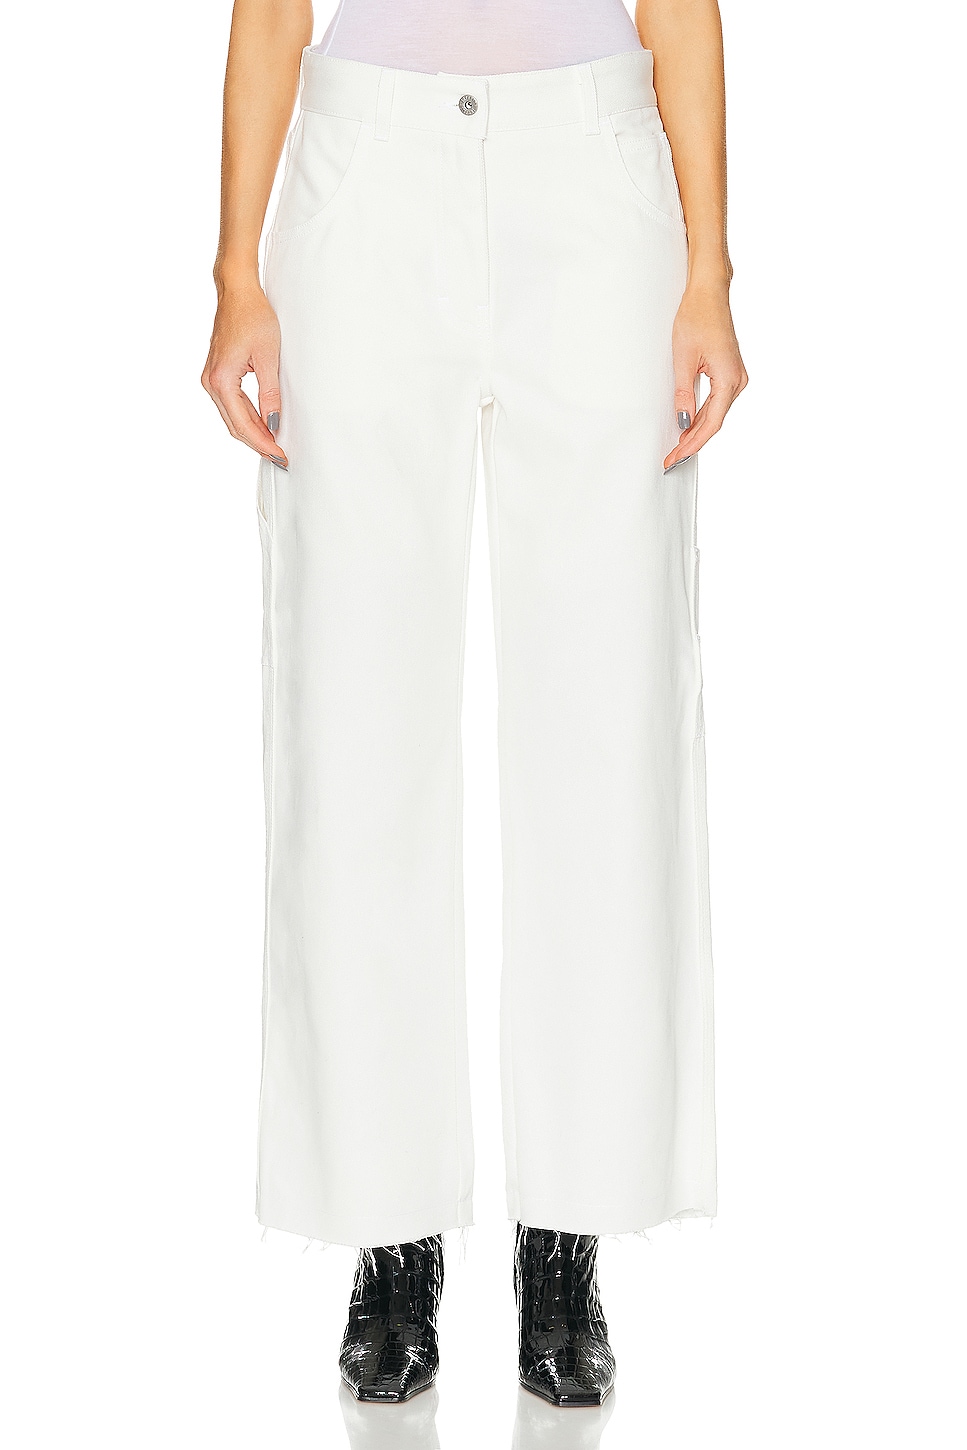 The Clarice Pant in White